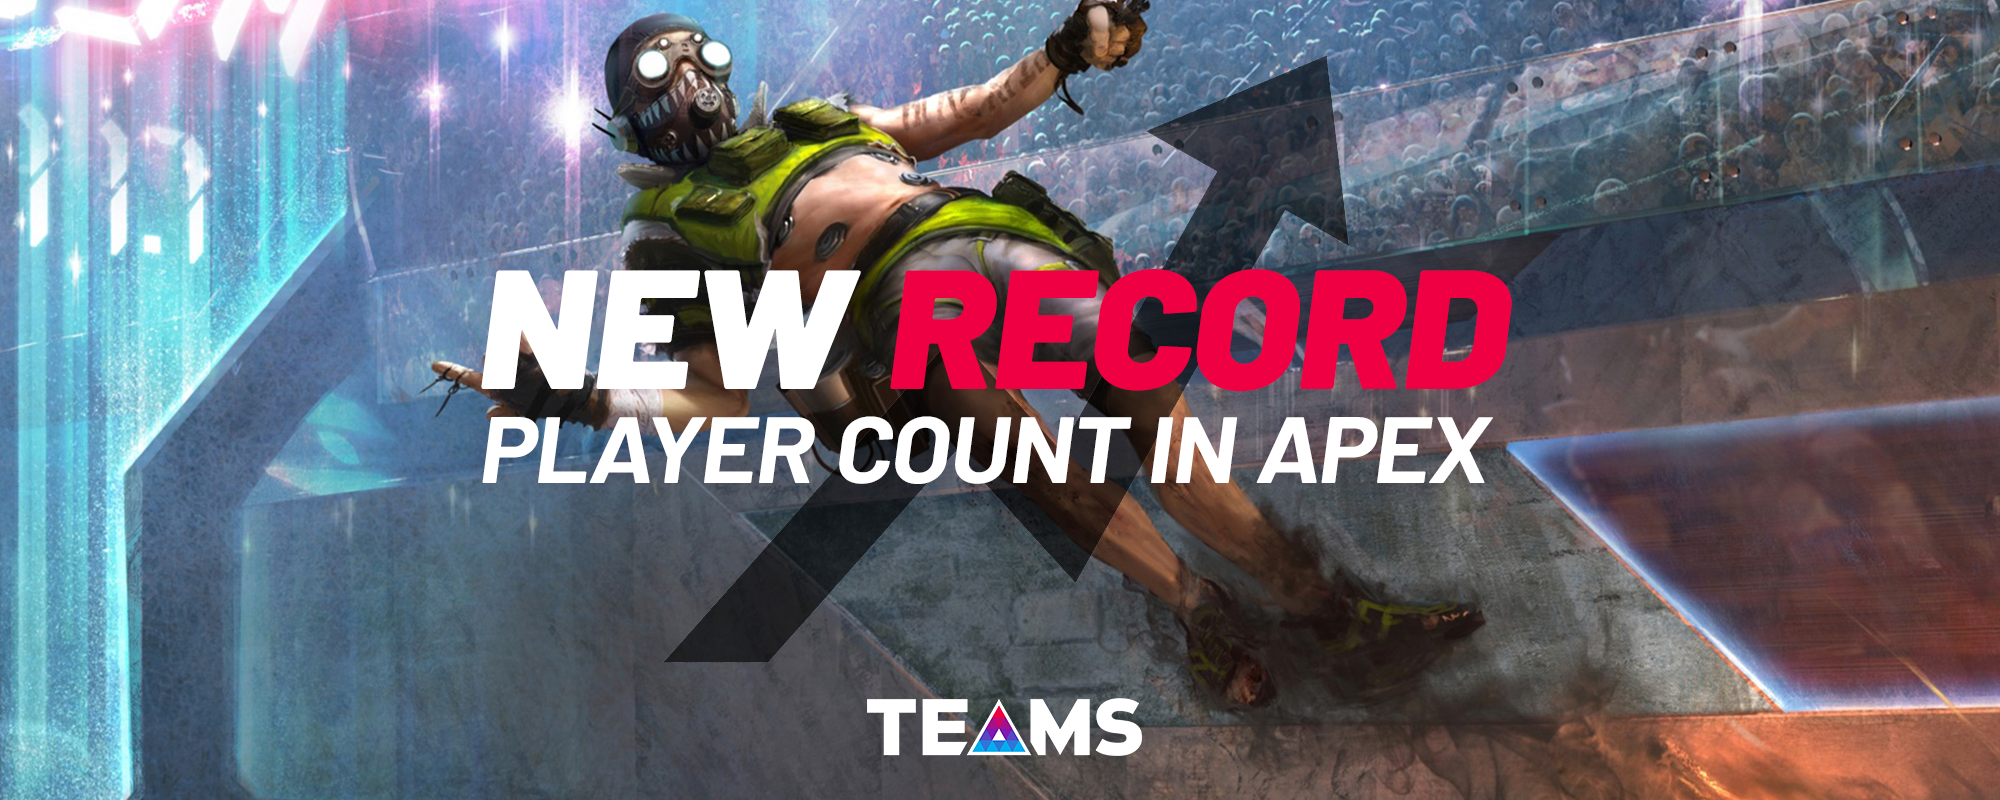 Apex Legends Steam Charts: Stats on How Many Players Are Playing